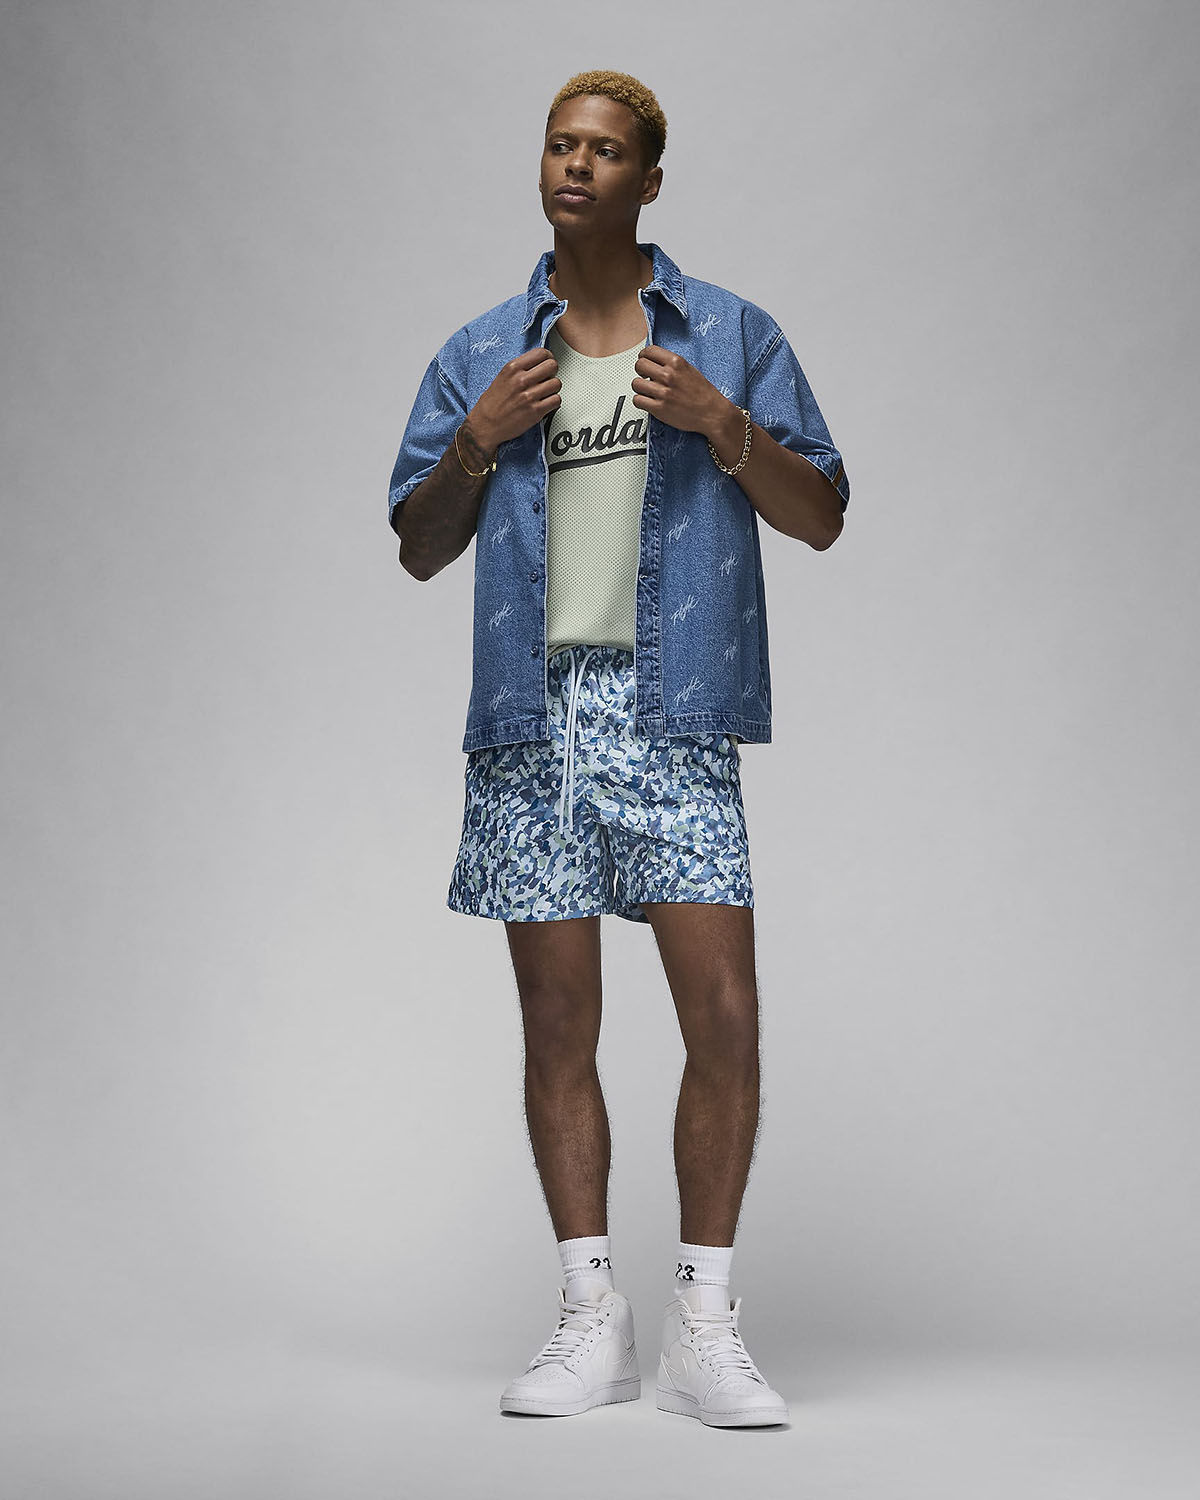 Jordan martin Essentials Printed Poolside Shorts Industrial Blue Outfit